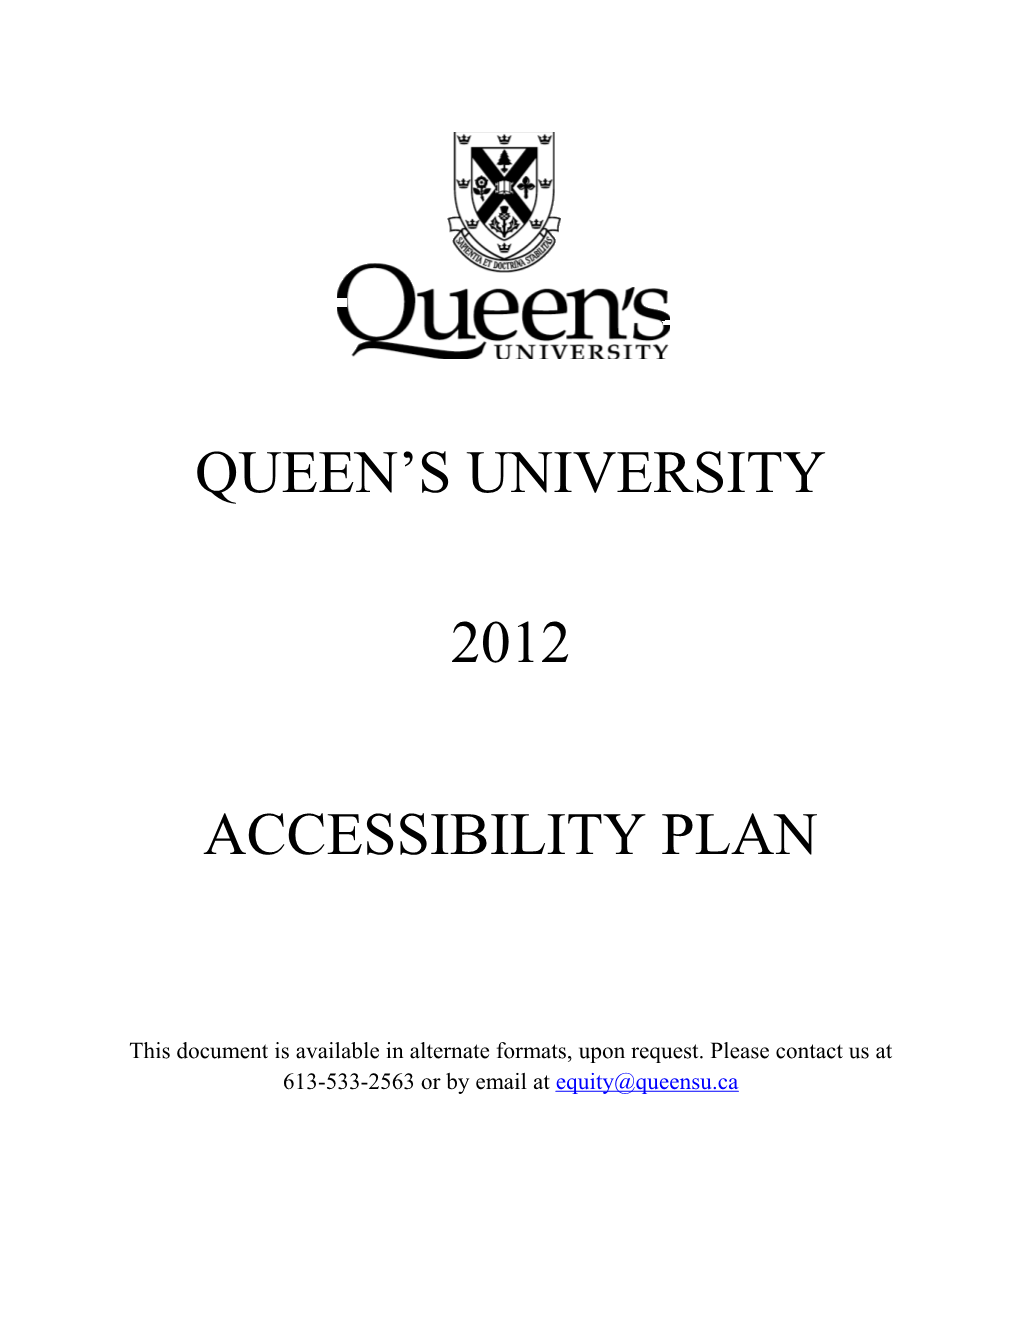 Queens University 2012 Accessibility Plan